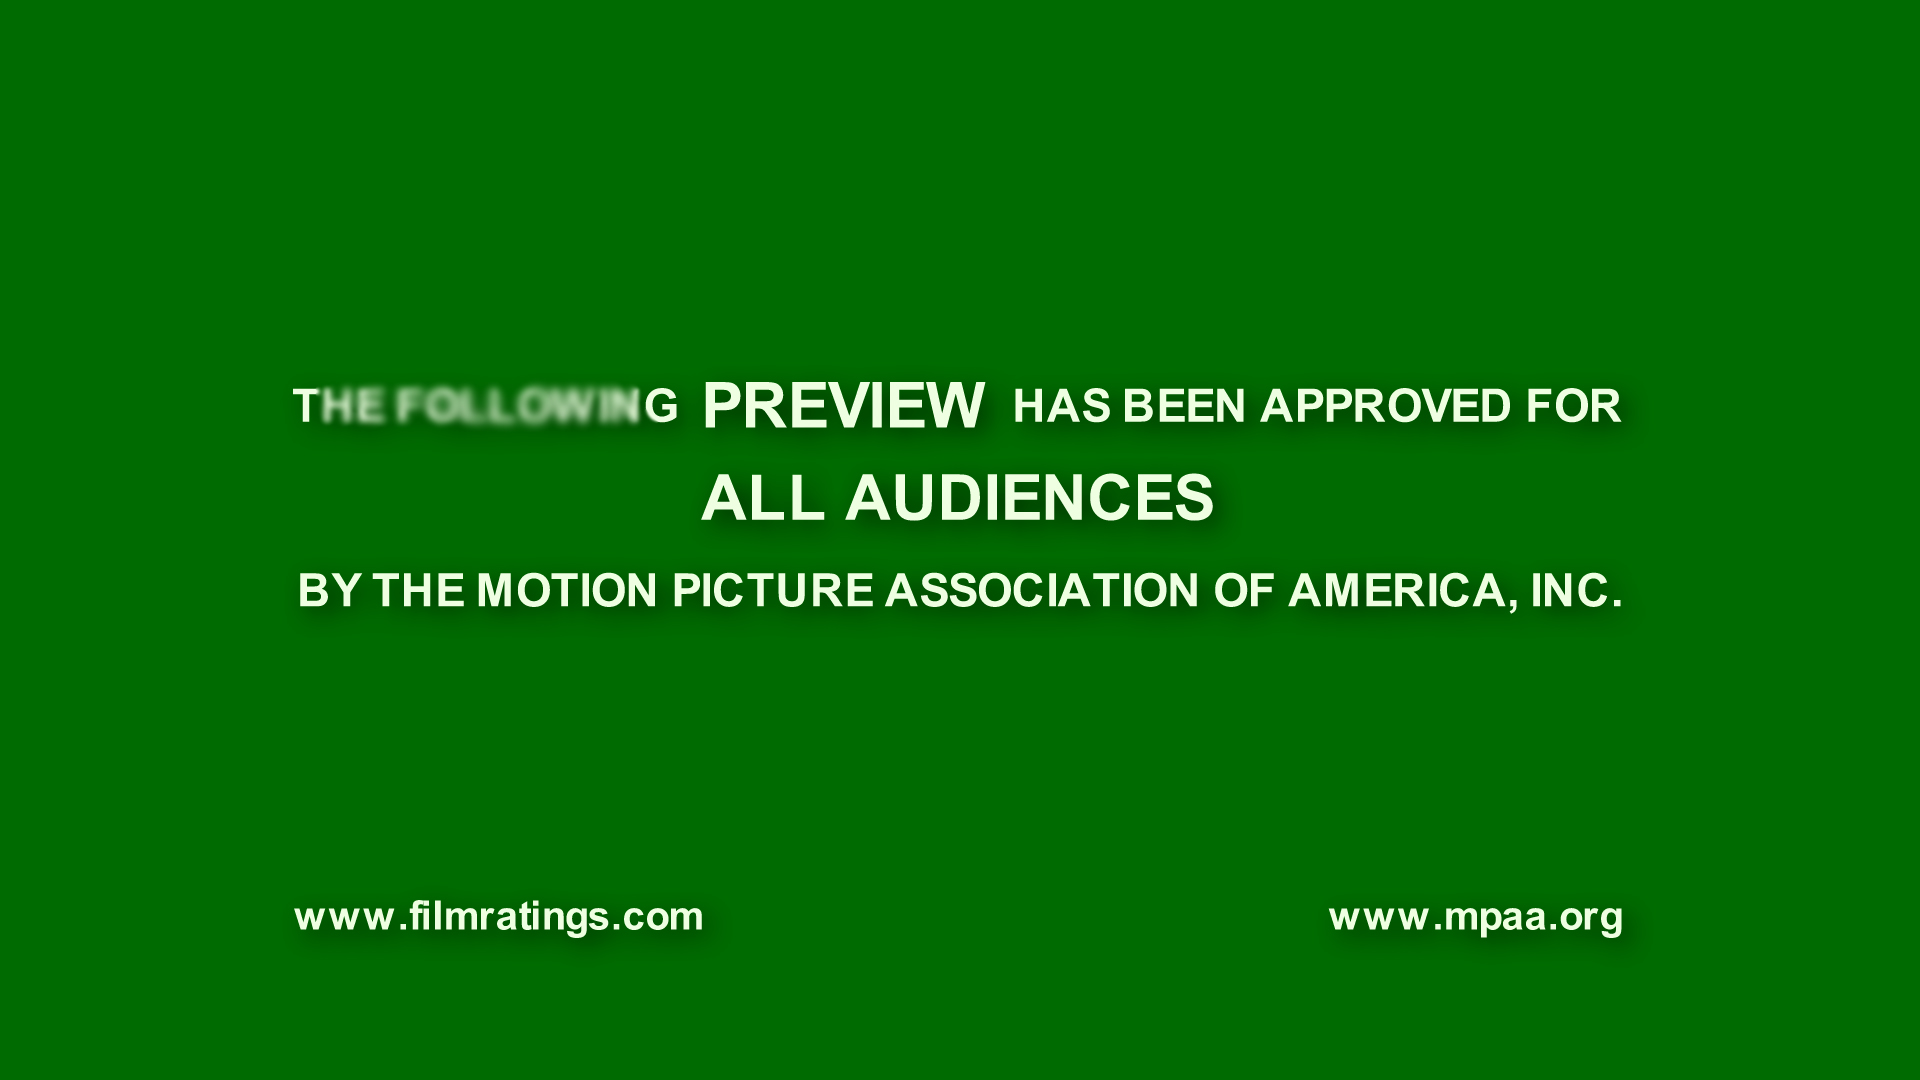 The following Preview has been approved for all audiences. Appropriate audiences